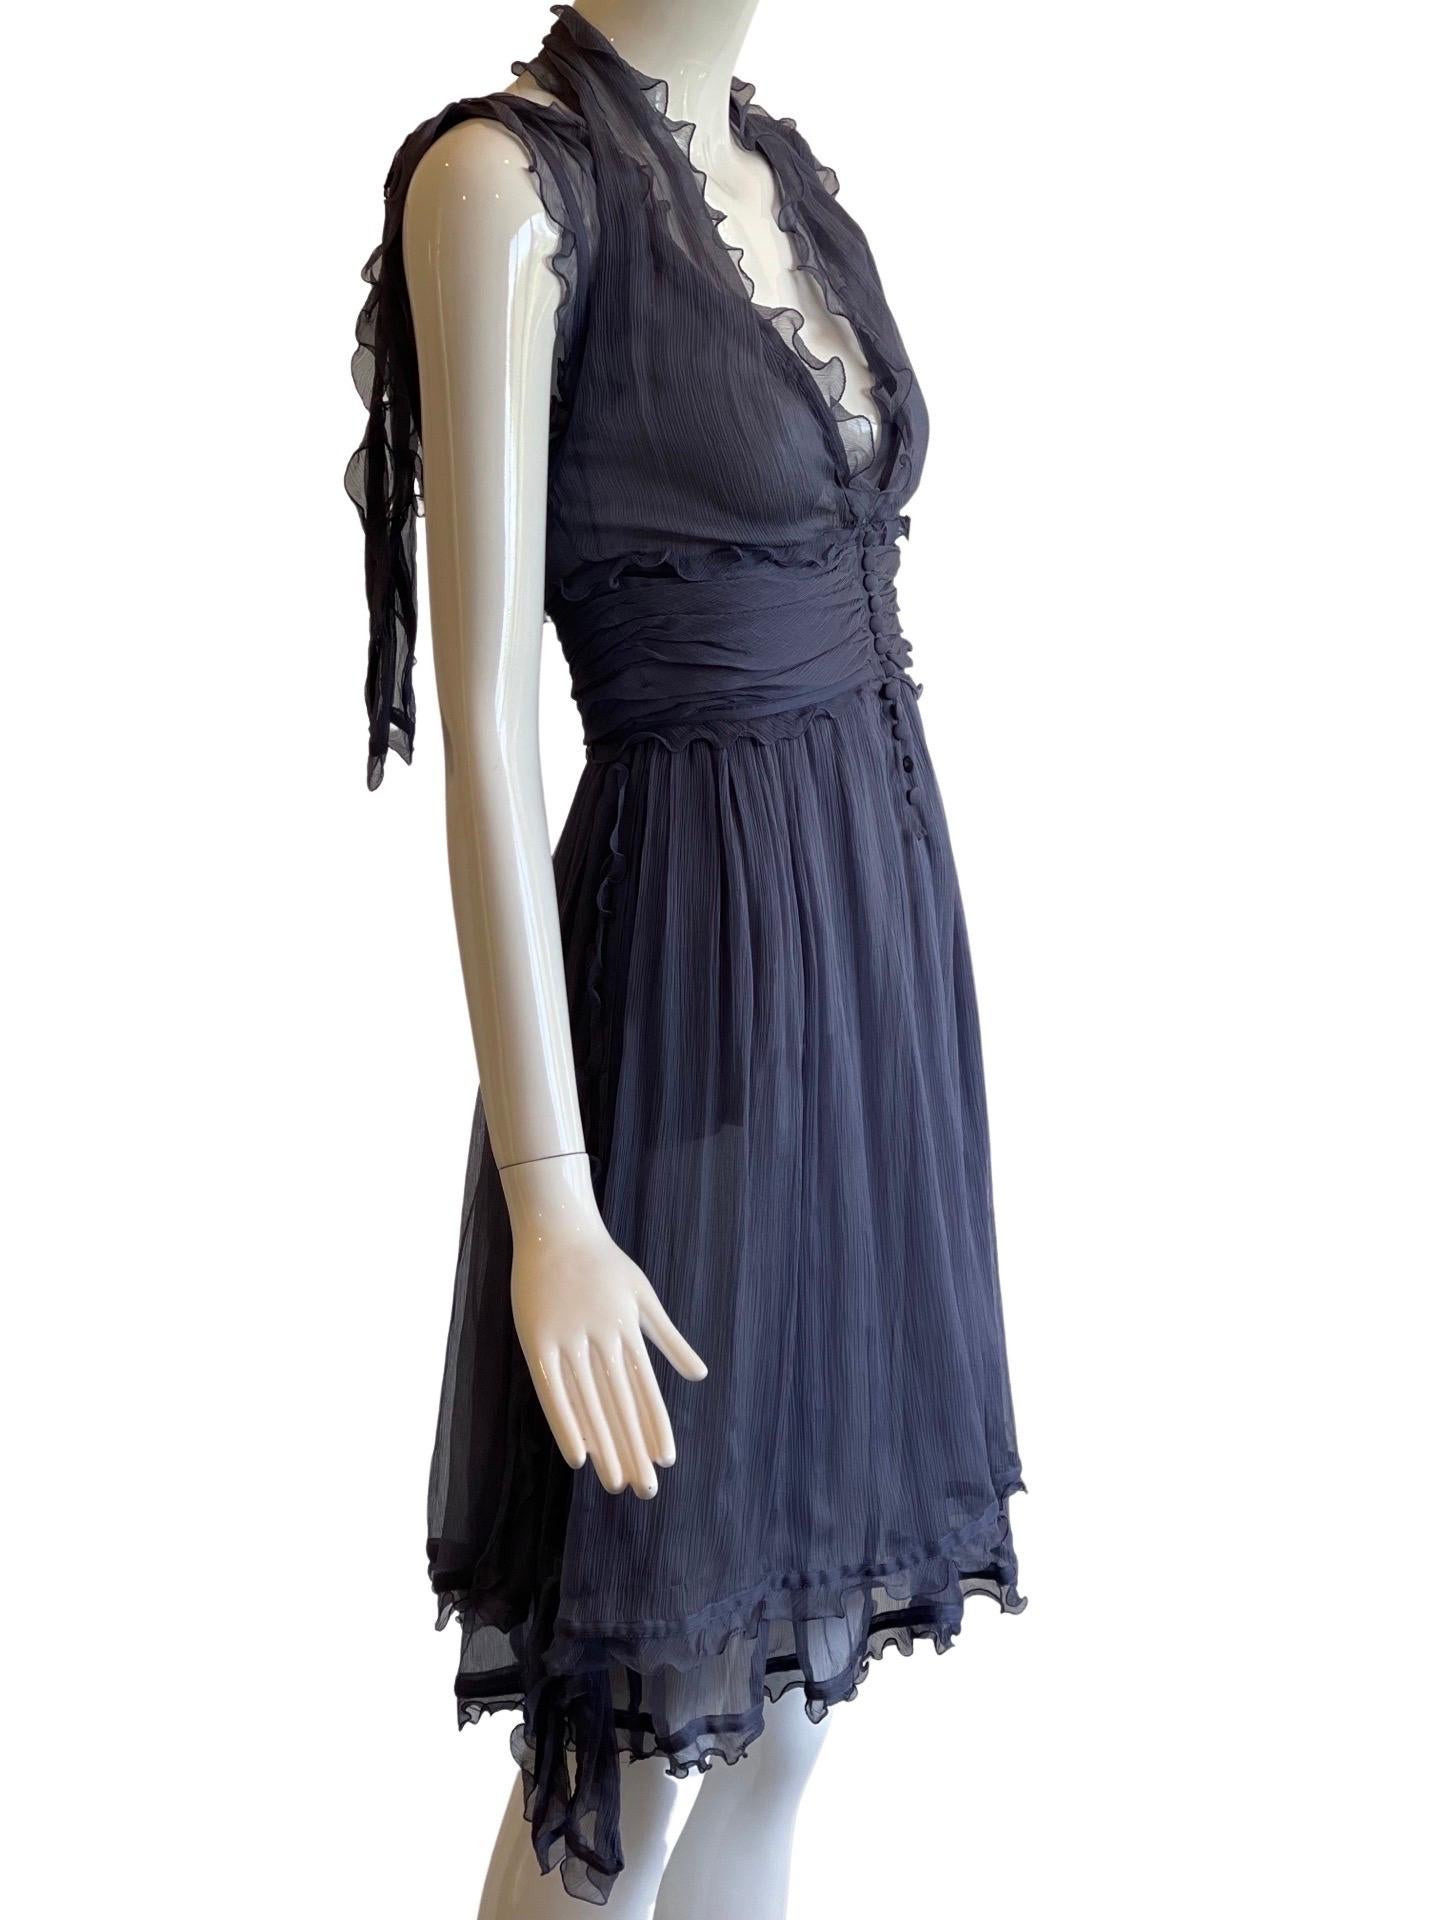 Stunning 00's or Y2K textured silk chiffon Fendi dress in a in a beautiful deep periwinkle colors.  Multiple layers of light fabric with ruffle detailing and loose straps of ruffled fabric cascading from the shoulders and some from the waist.  This